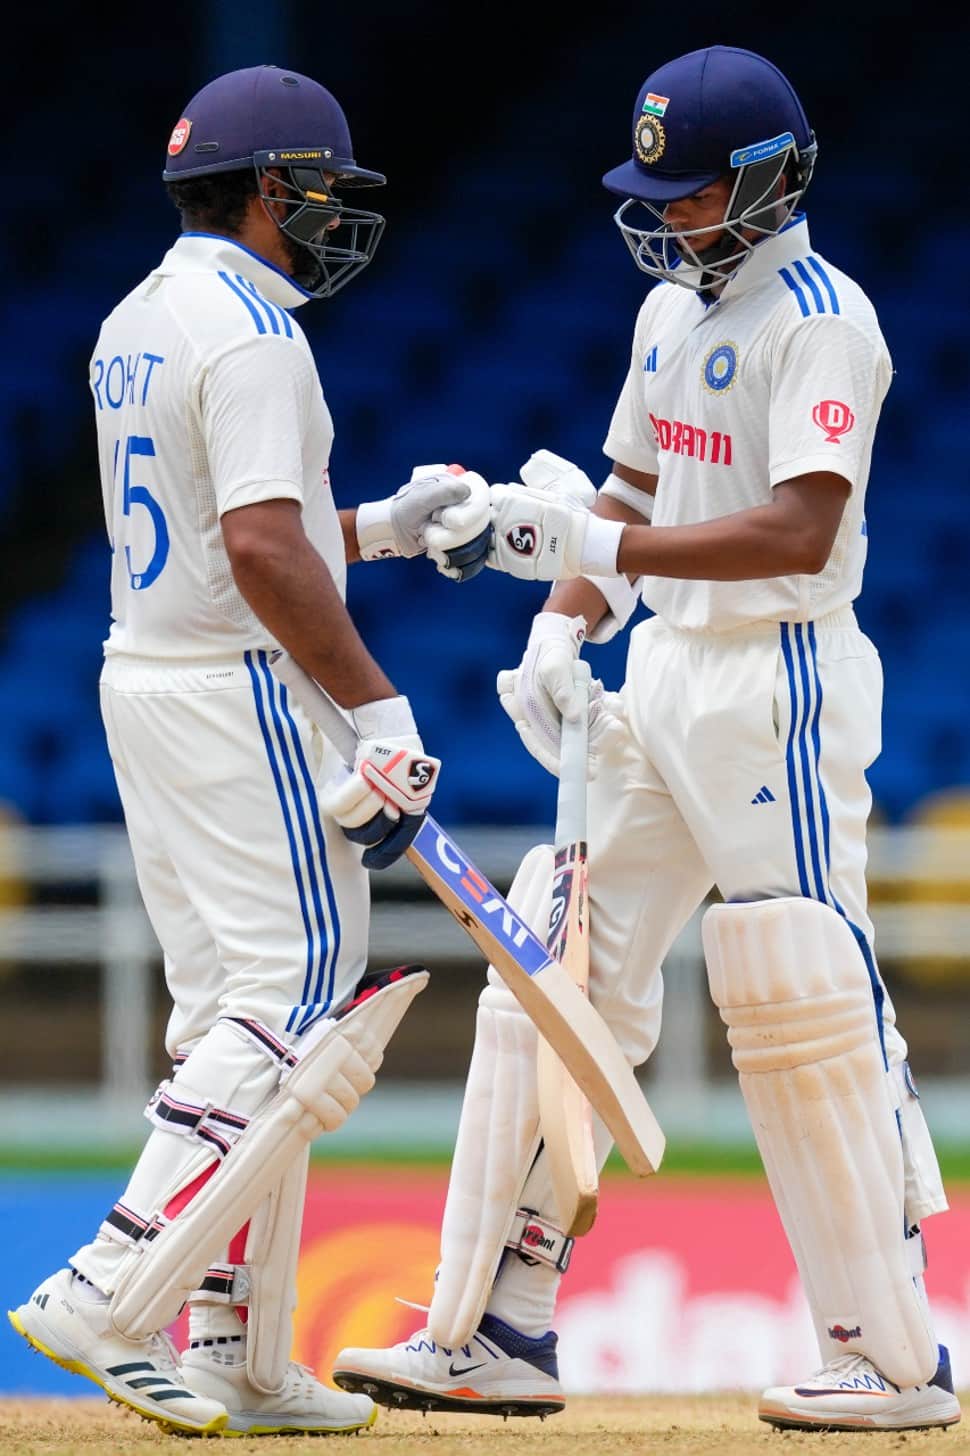 Rohit Sharma and Yashasvi Jaiswal ended up with 466 runs in the two-match Test series against West Indies. These are the most runs by an Indian opening pair in an away Test series, breaking the record of Virender Sehwag and Aakash Chopra, who scored 459 runs vs Australia in 2003-04 series. (Photo: AP)